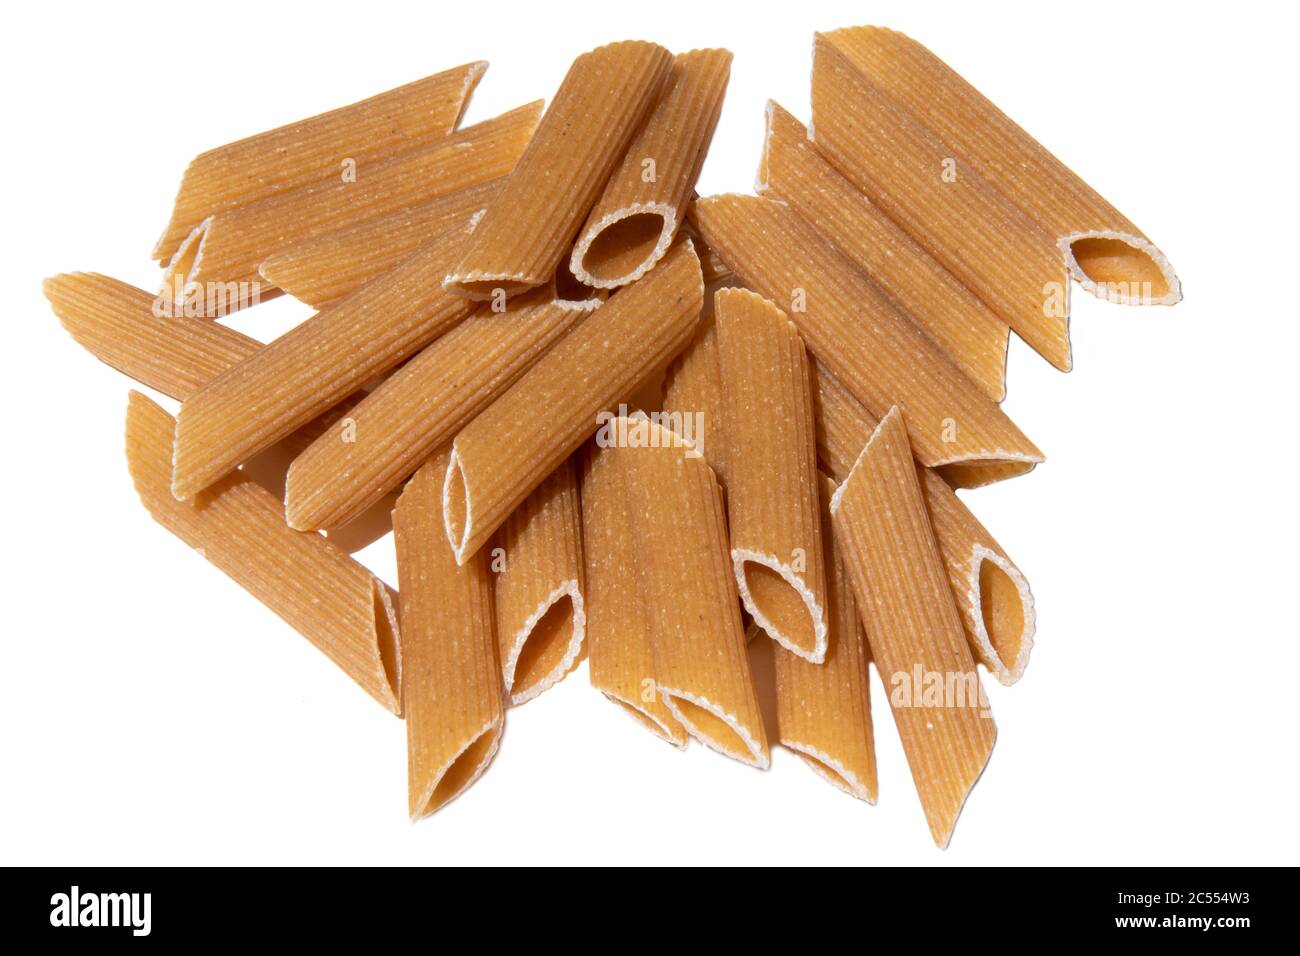 Pasta stack isolated on white. italian wholegrain penne lunch ingredient. healthy eating for vegetarian full of carbohydrate. uncooked grain mediterra Stock Photo